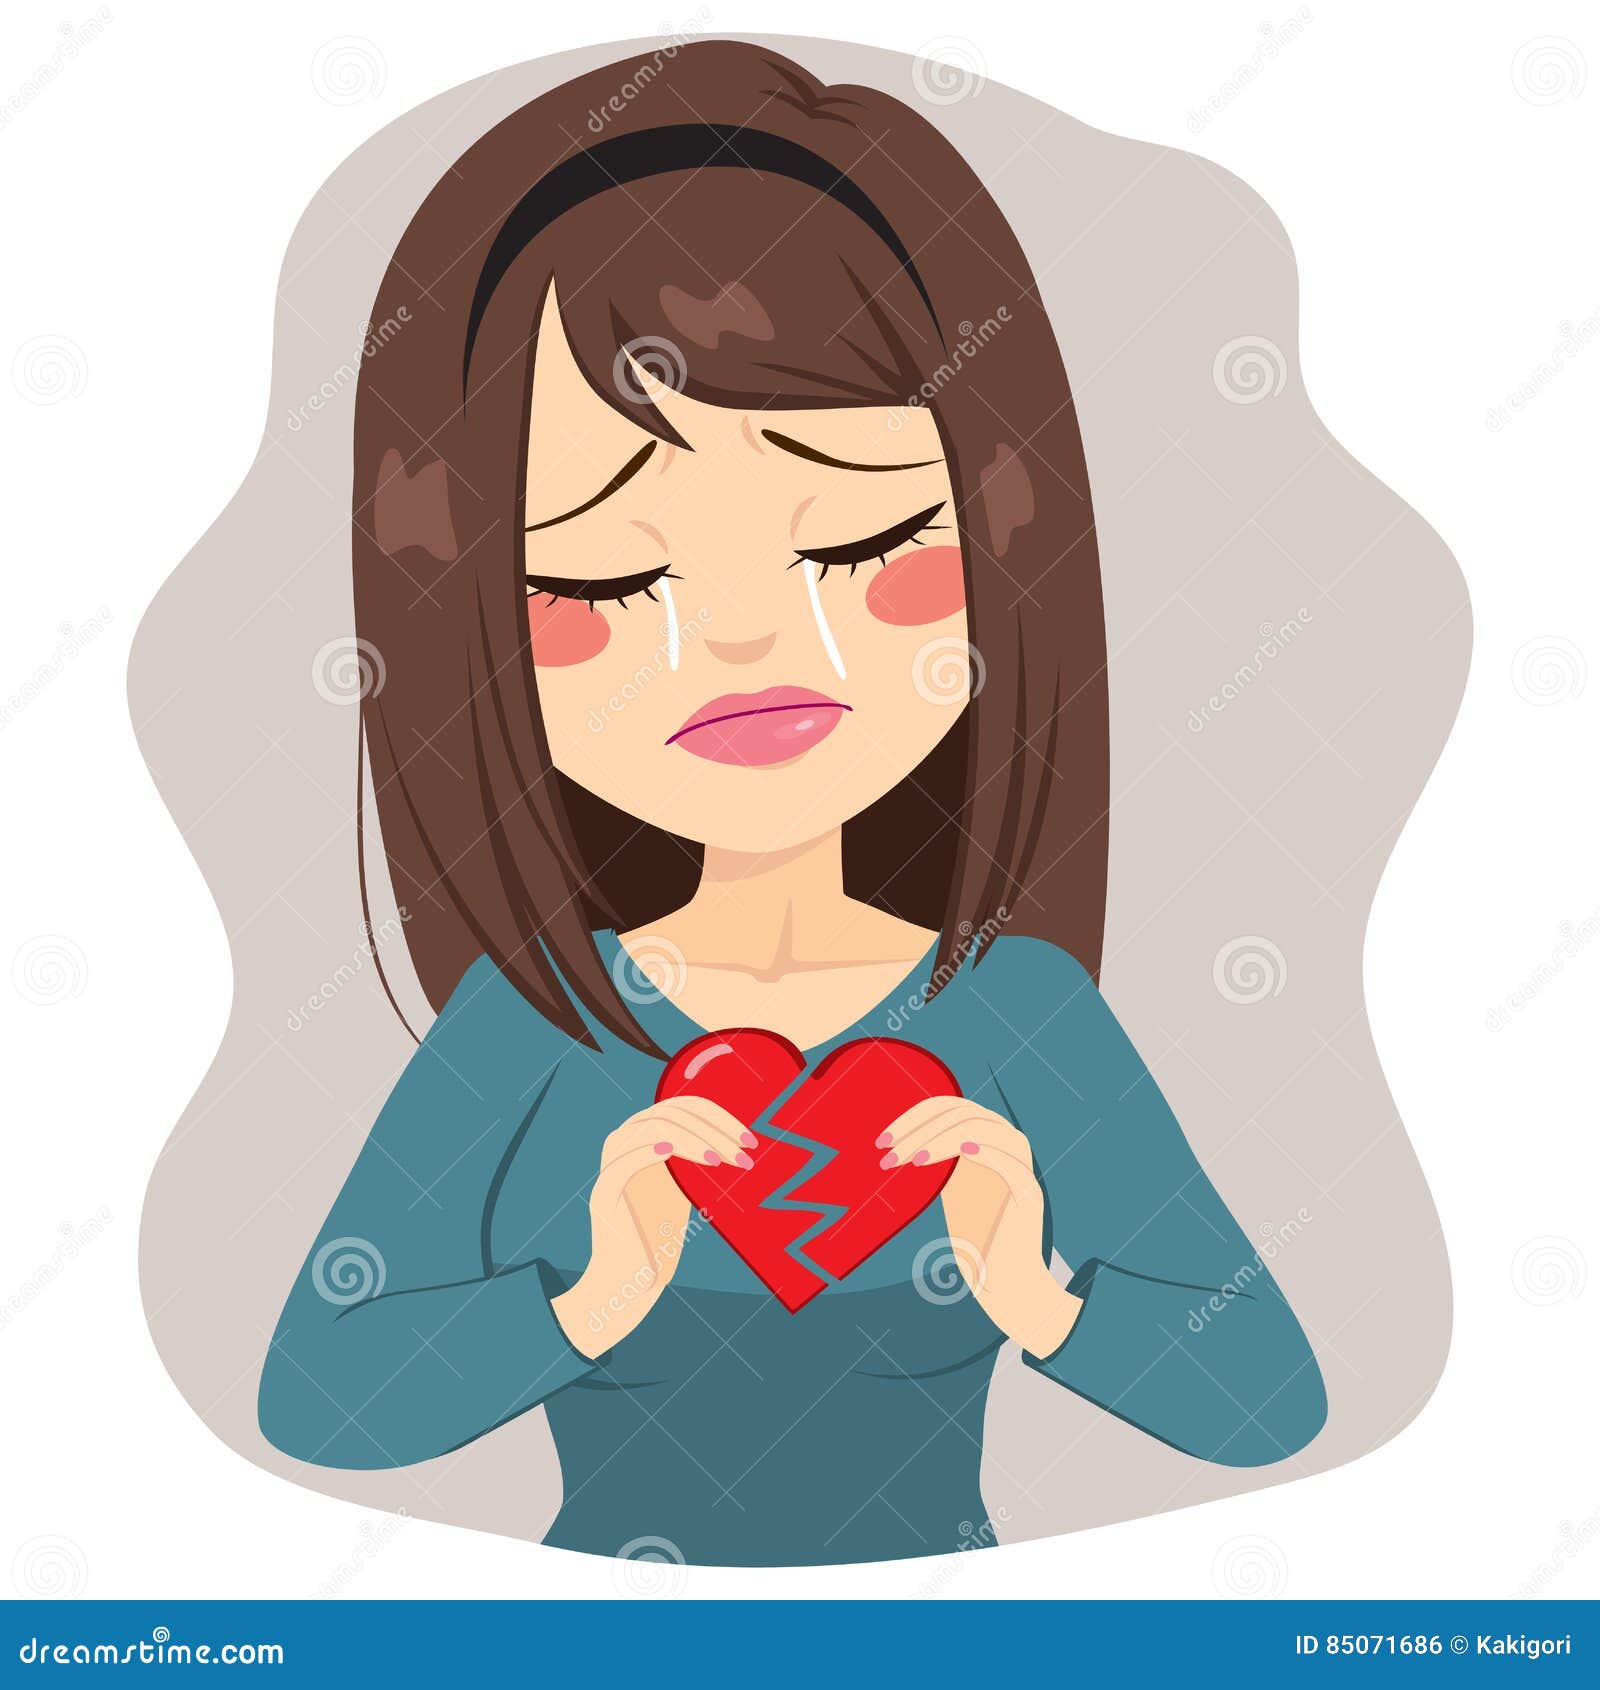 woman-broken-heart-young-sad-holding-two-pieces-crying-85071686.jpg